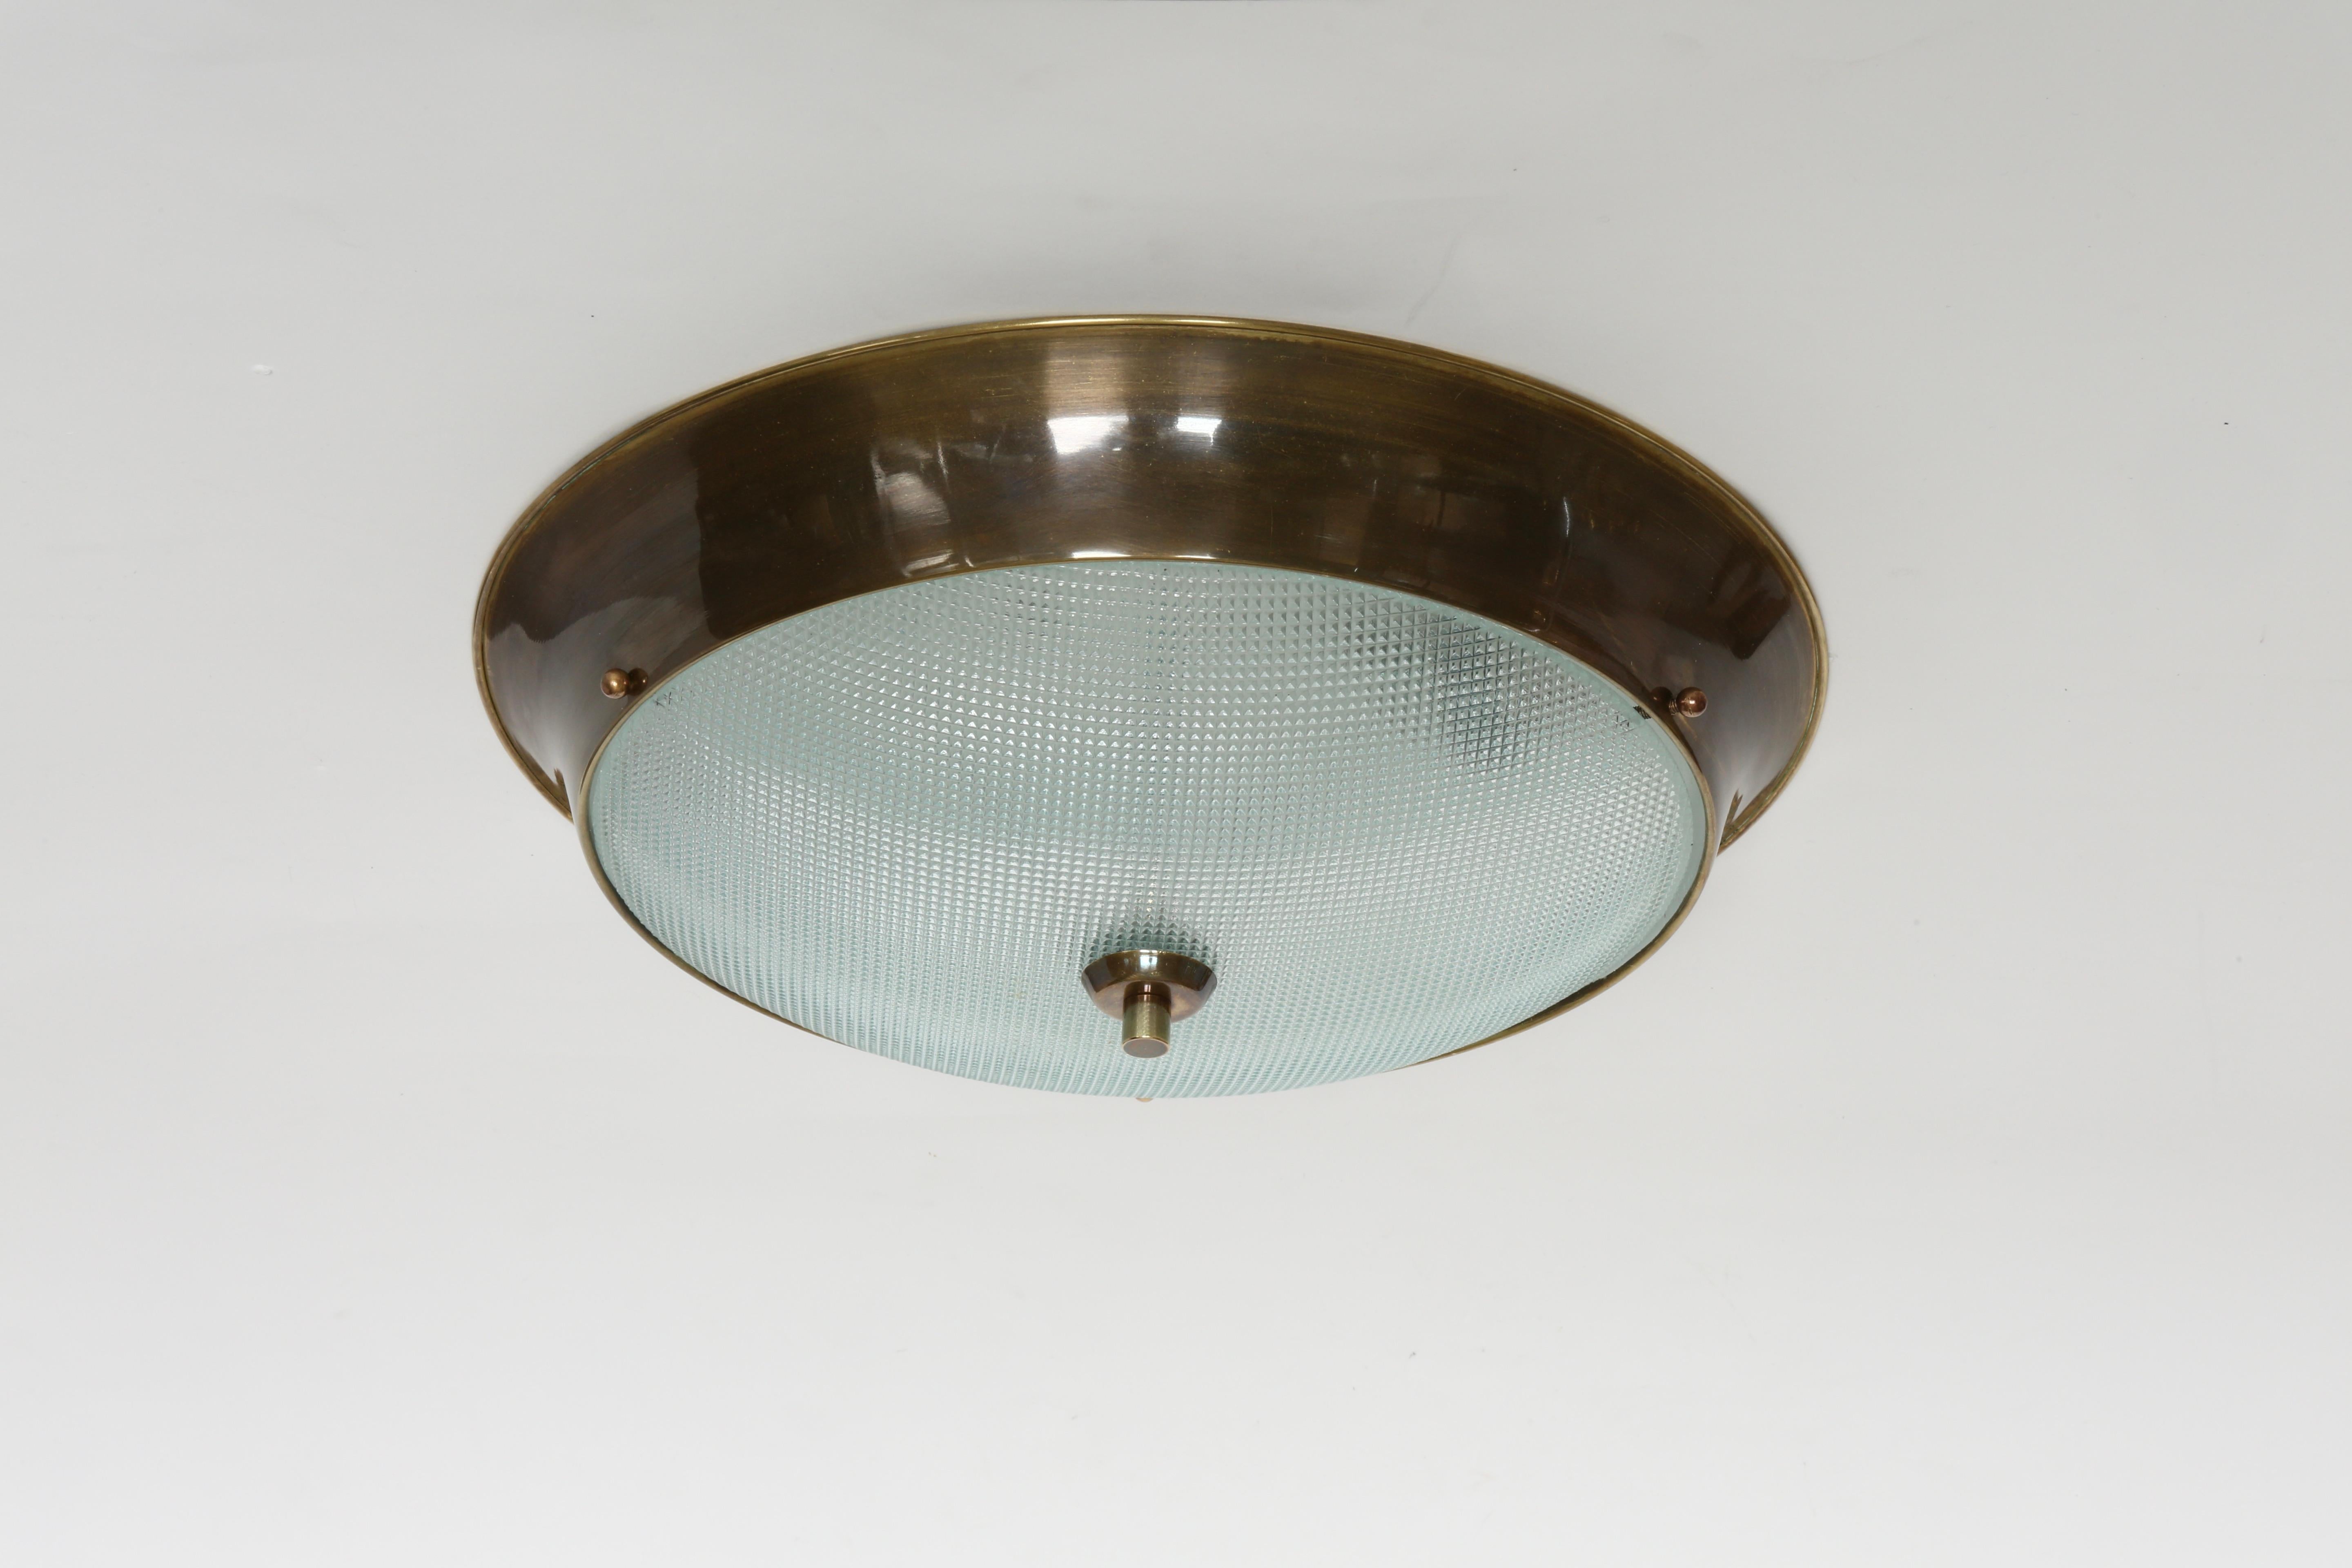 Flush mount ceiling light.
Designed and made in Italy in 1960s
Textured glass, patinated brass.
Takes 2 Edison bulbs.
Rewired for US.
Four flush mounts are available.
Price is for one light.

We take pride in bringing our vintage fixtures to their